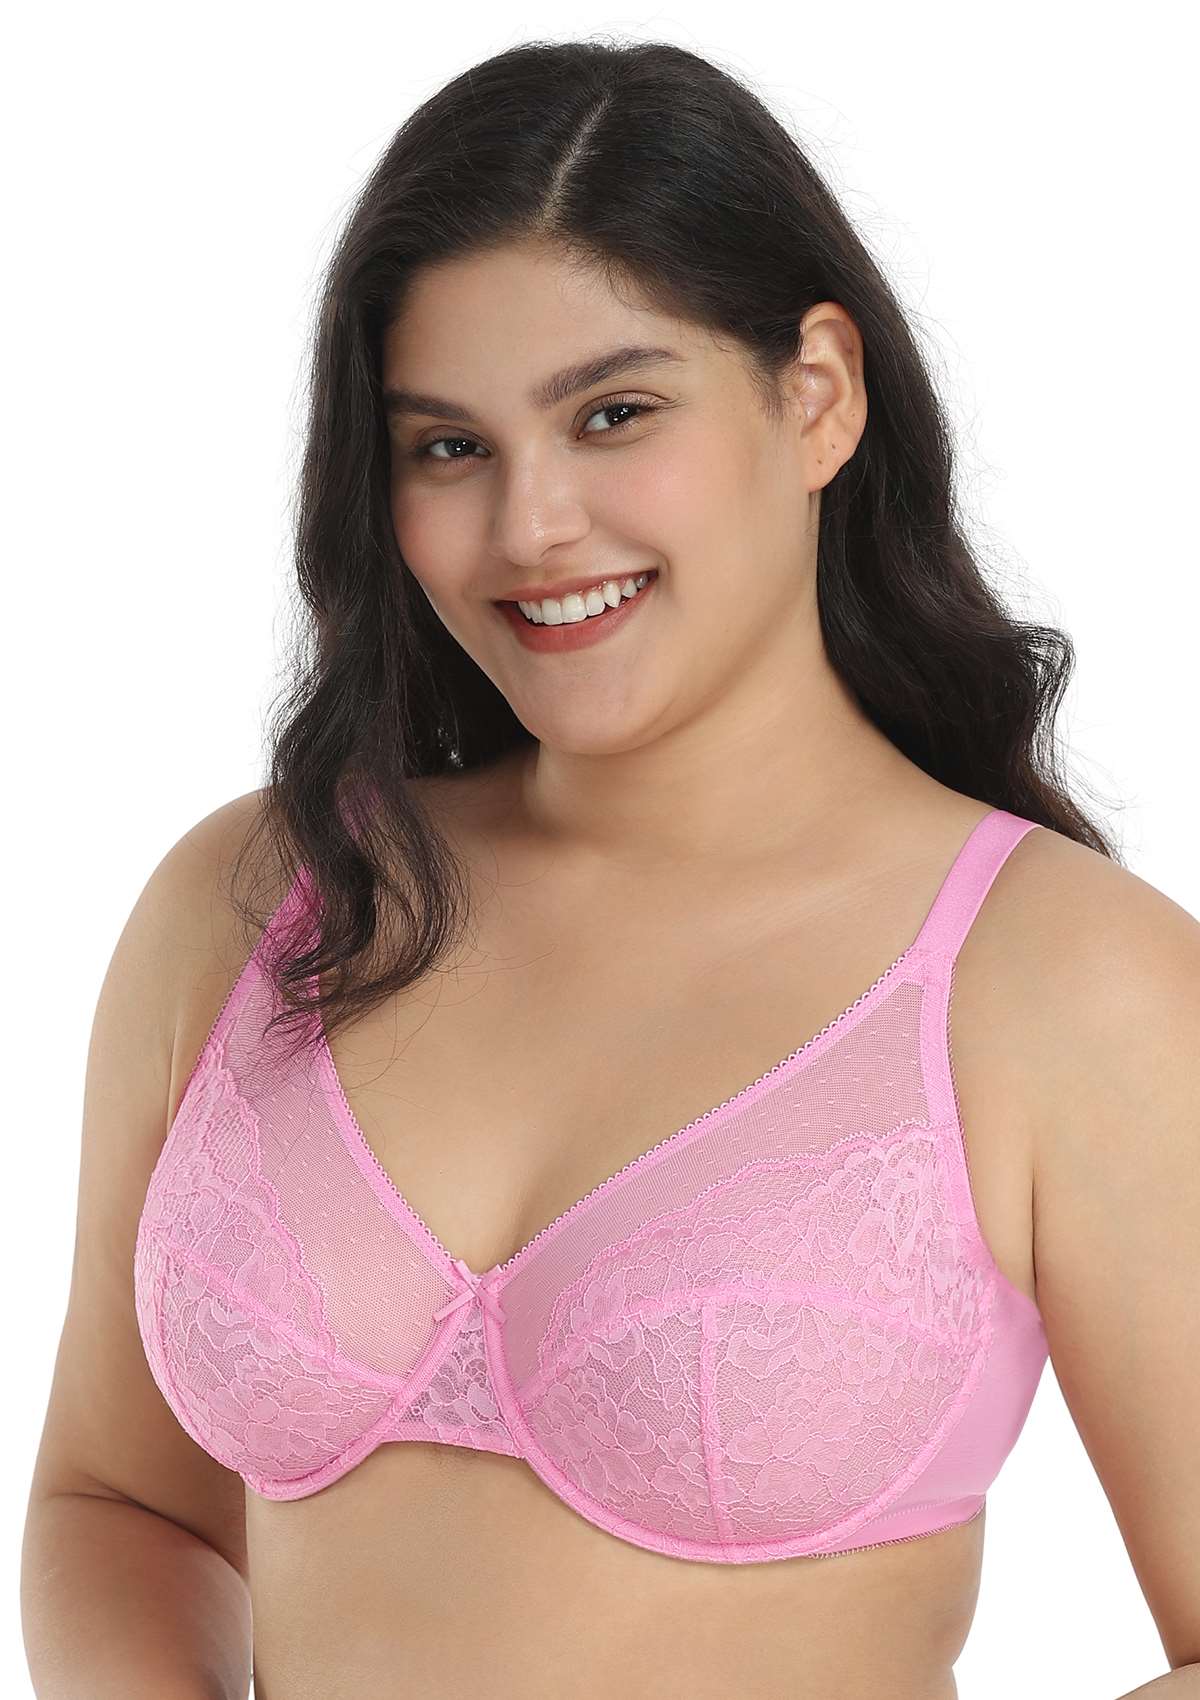 HSIA Enchante Lacy Bra: Comfy Sheer Lace Bra With Lift - Pink / 42 / G